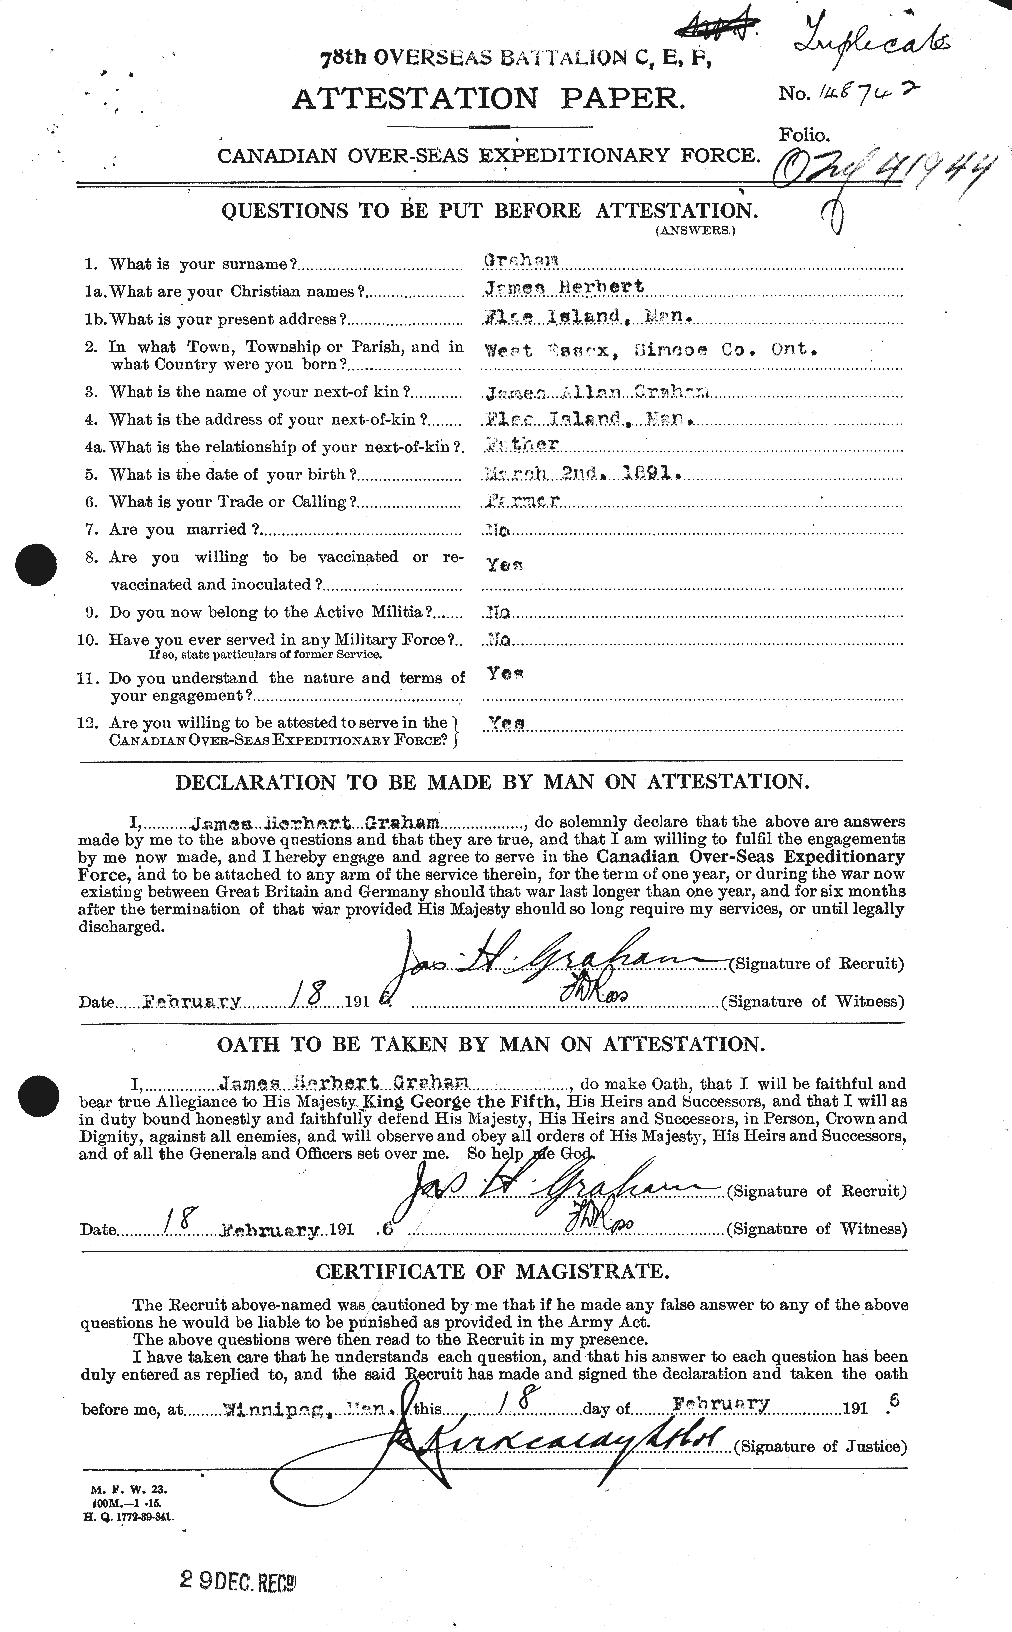 Personnel Records of the First World War - CEF 357825a